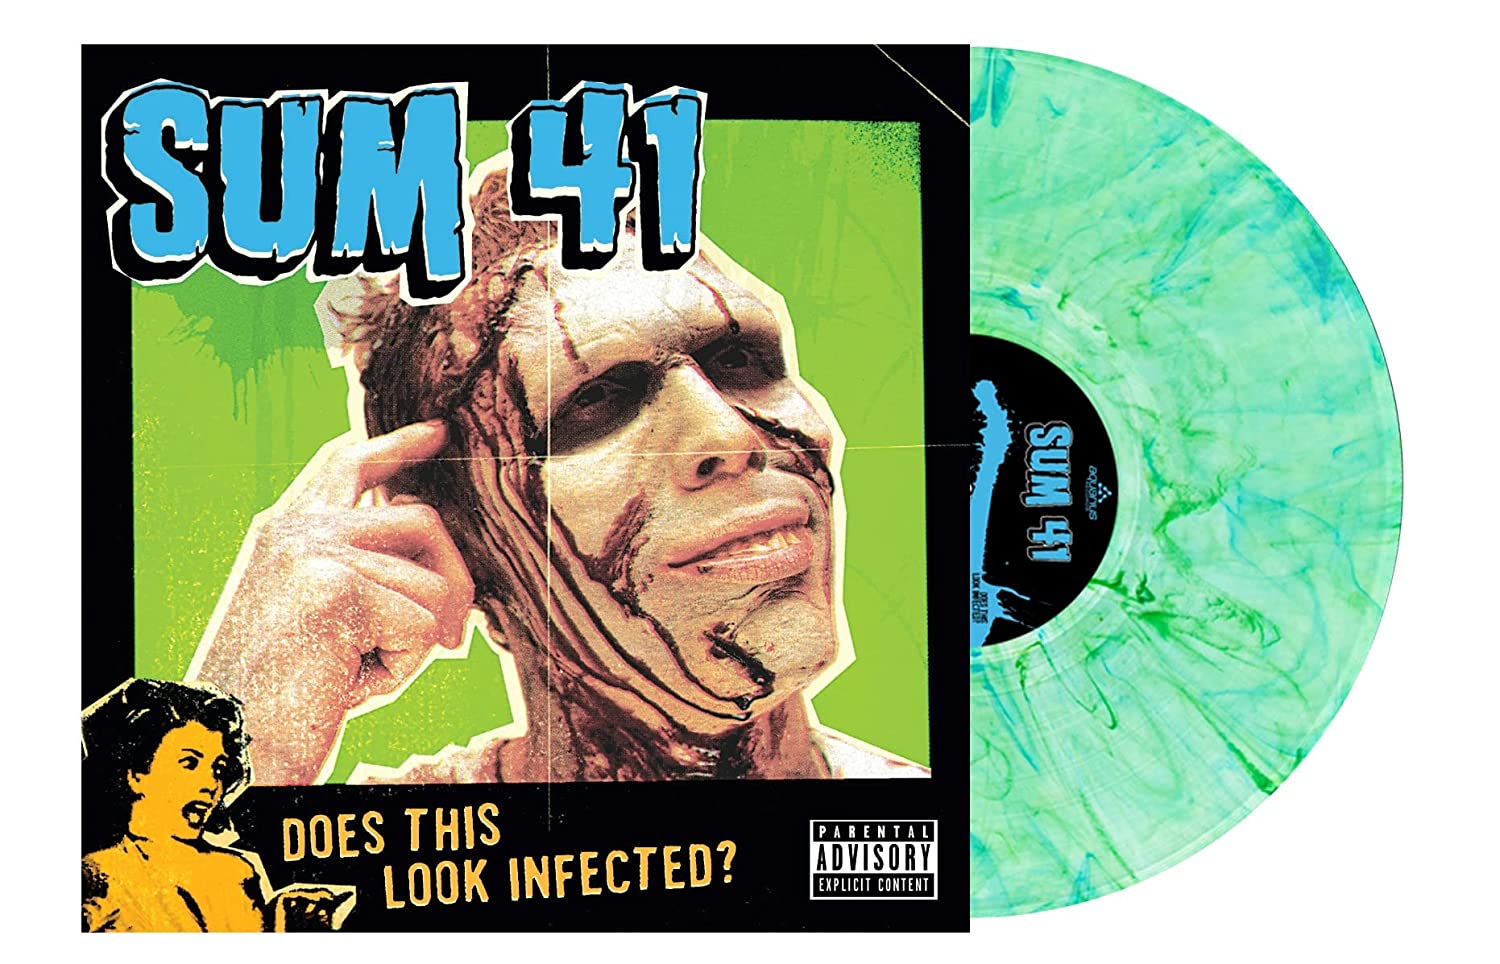 Sum 41 - Does This Look Infected? LP (180g, Green & Blue Swirl Vinyl, Reissue)